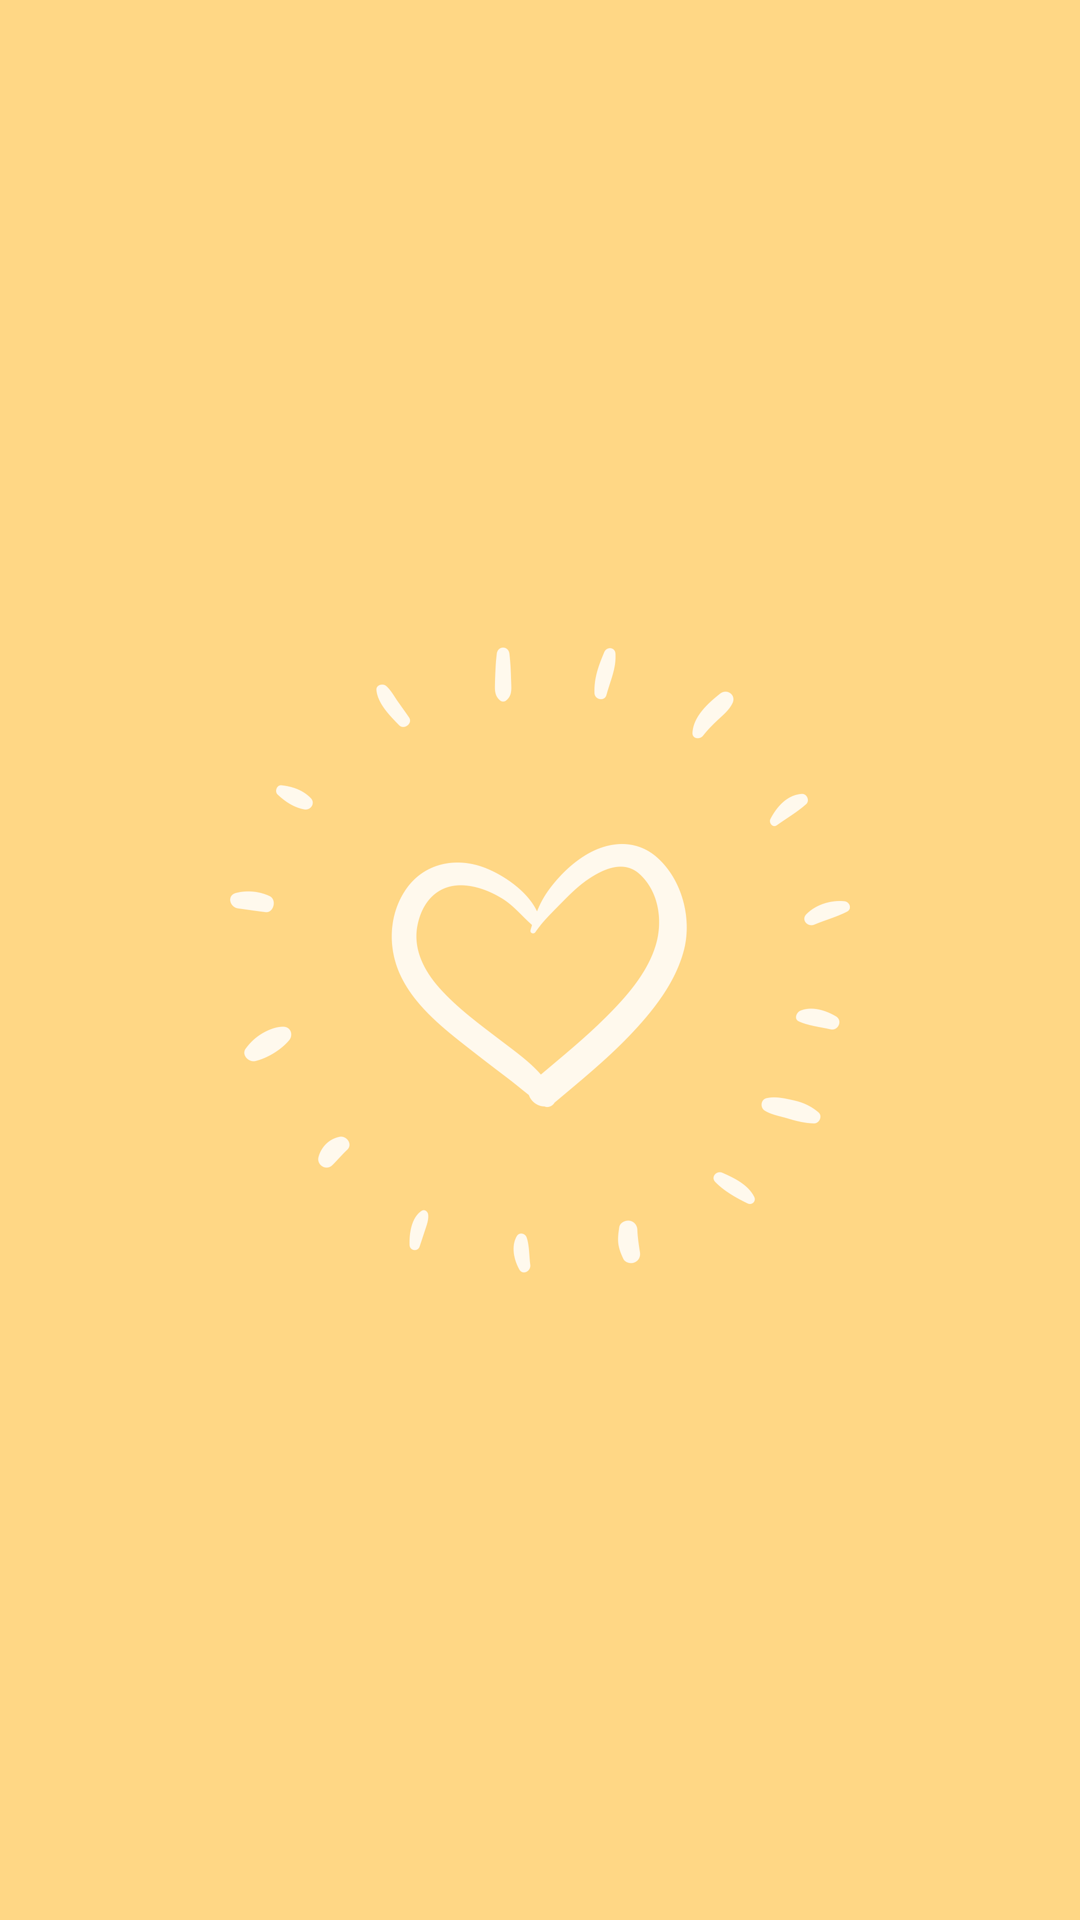 Soft yellow color and simple graphic ✯ pin. taylornoblee